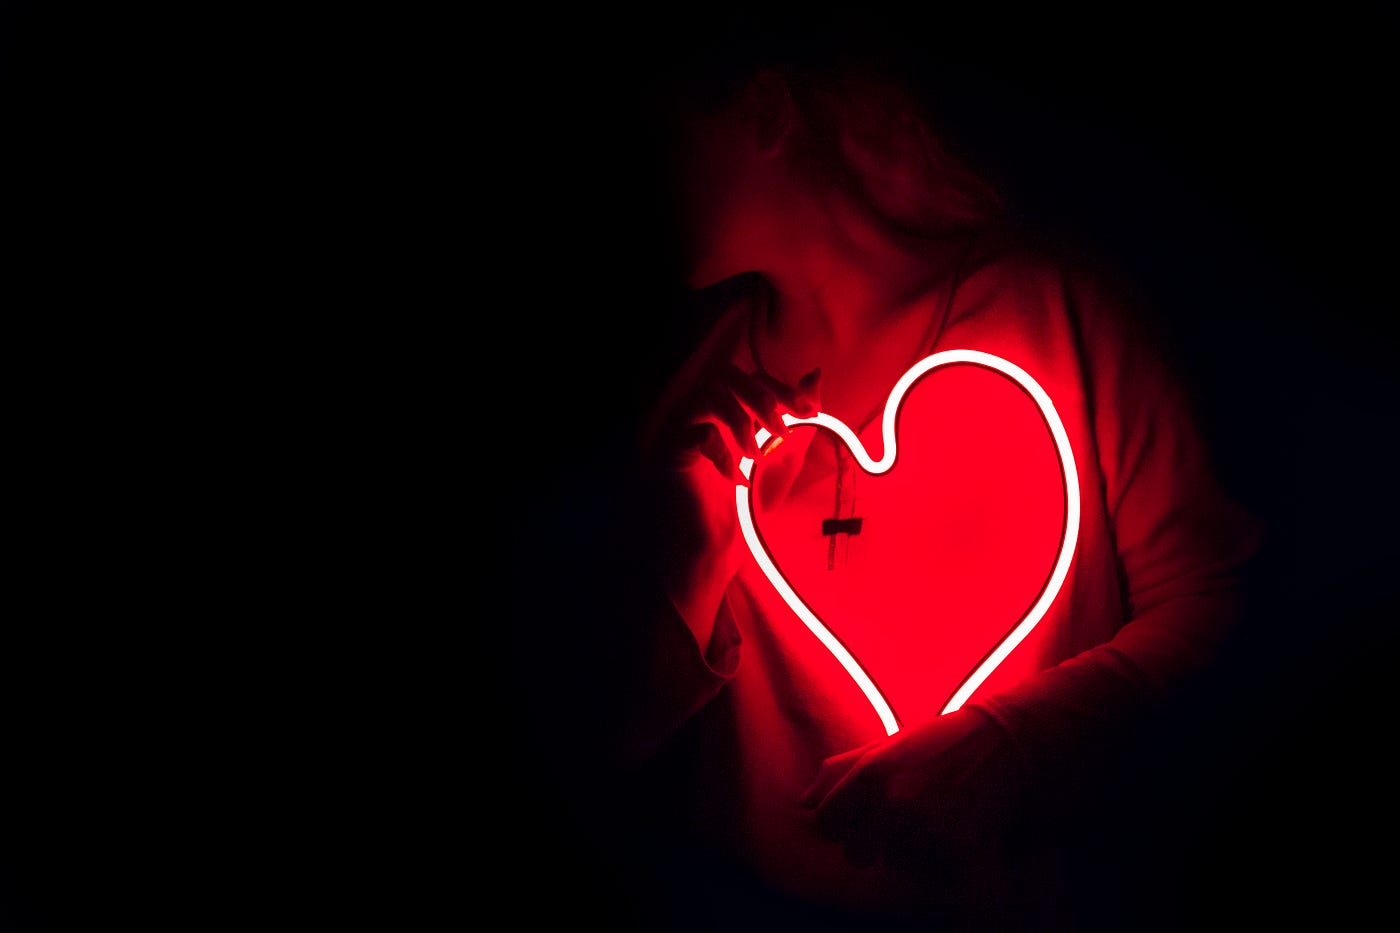 Woman, on the right side of the screen, holds a heart-shaped fiberoptic line over her torso. Black background, with woman barely in view.